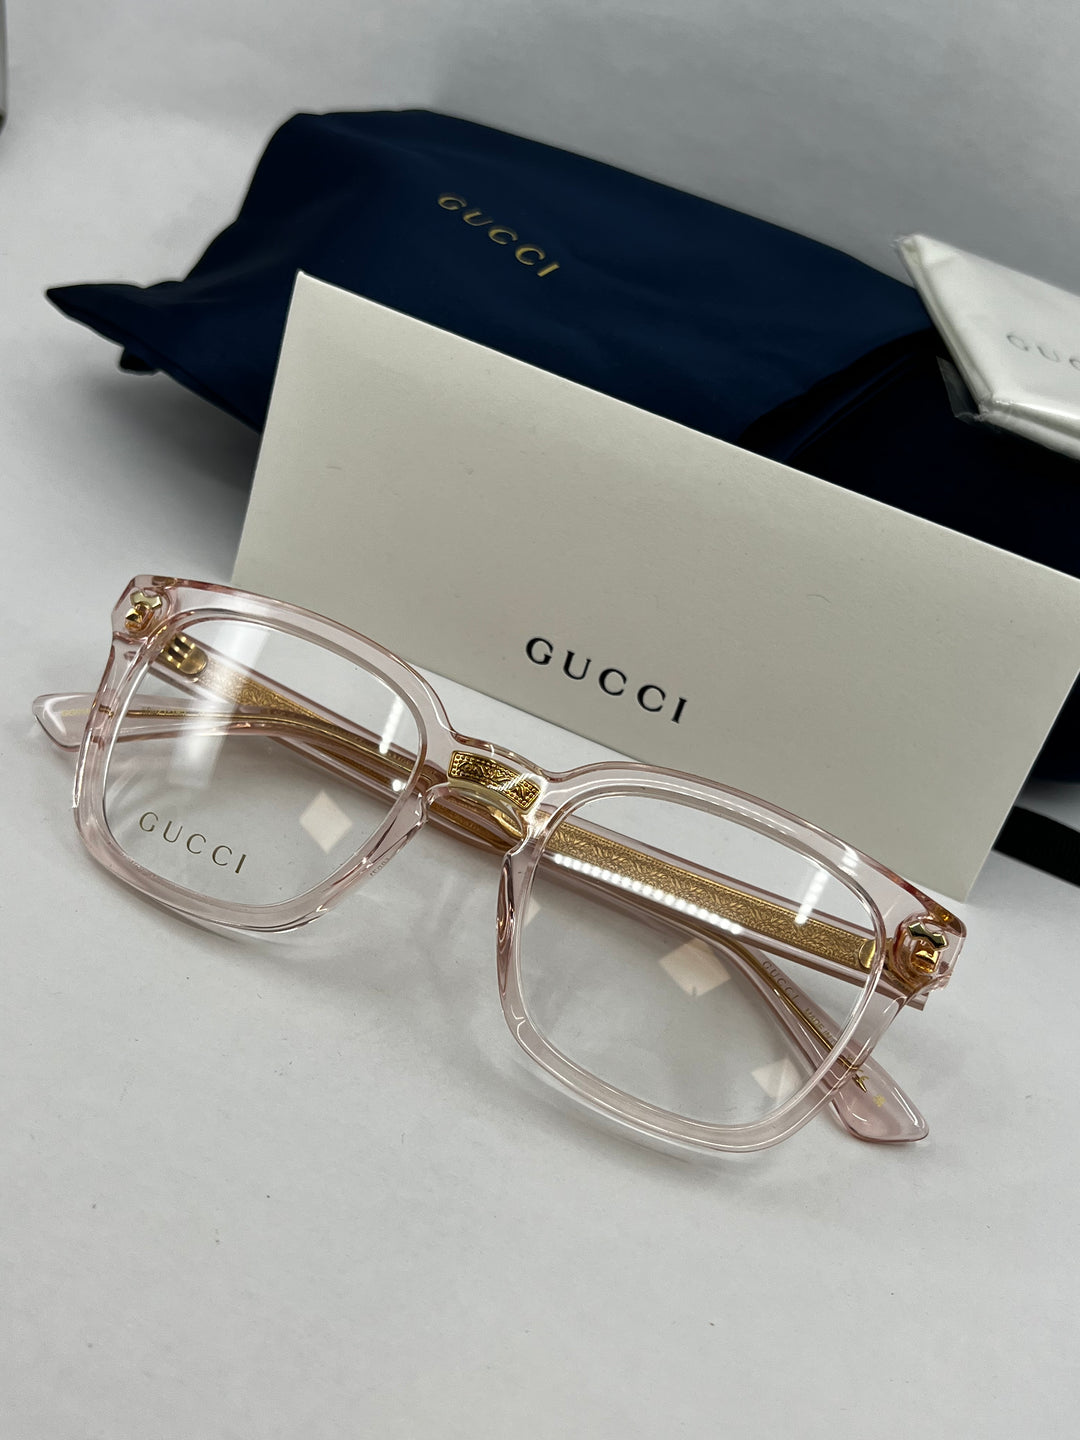 Gucci GG0184O Clear Pink Square Frames